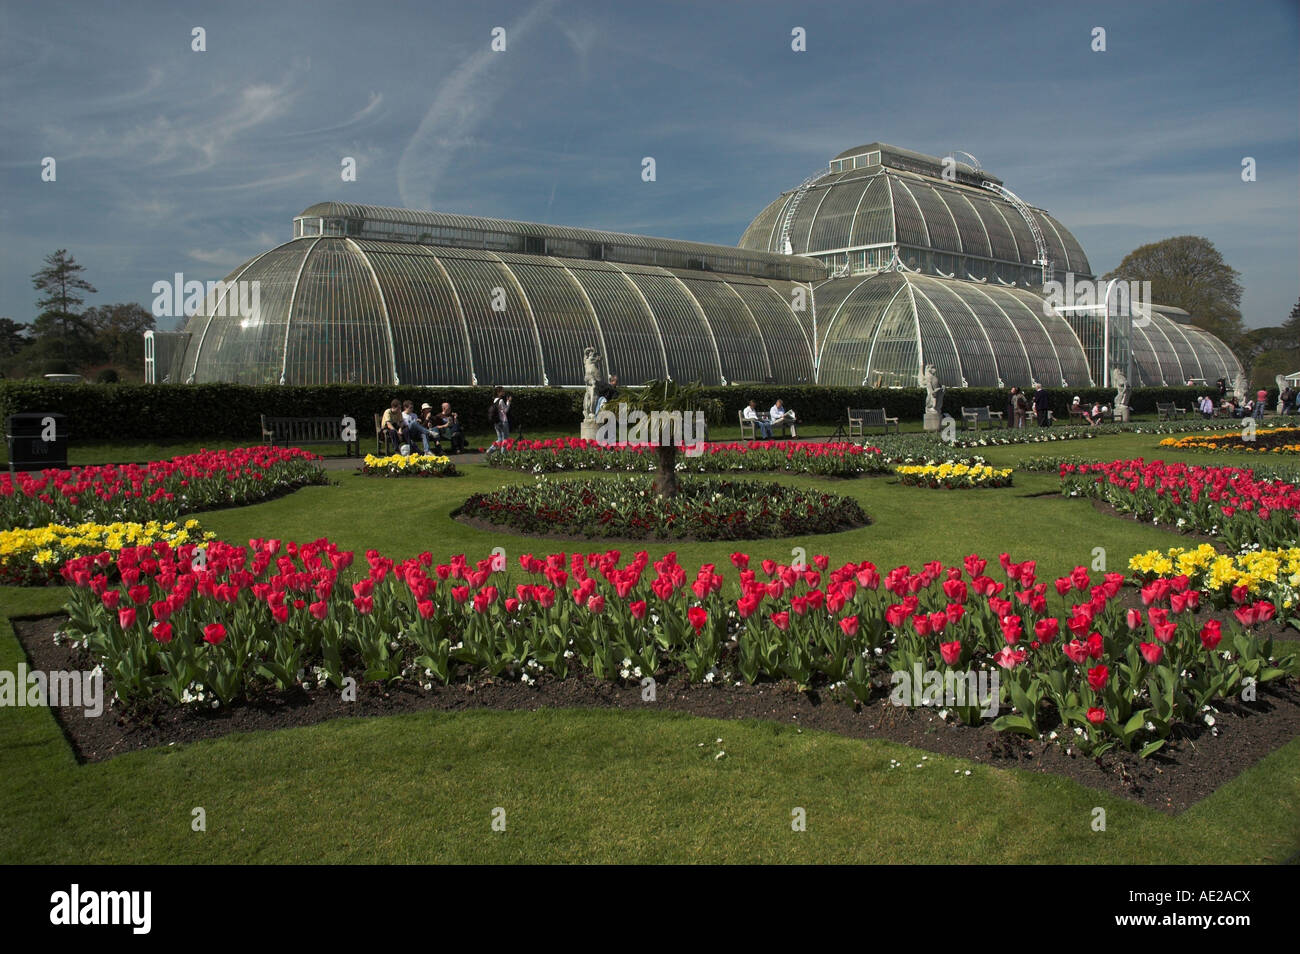 Beds of red and yellow bulbs in bloom in spring in front of the Palm House in the Royal Botanic Gardens, Kew, London. Stock Photo